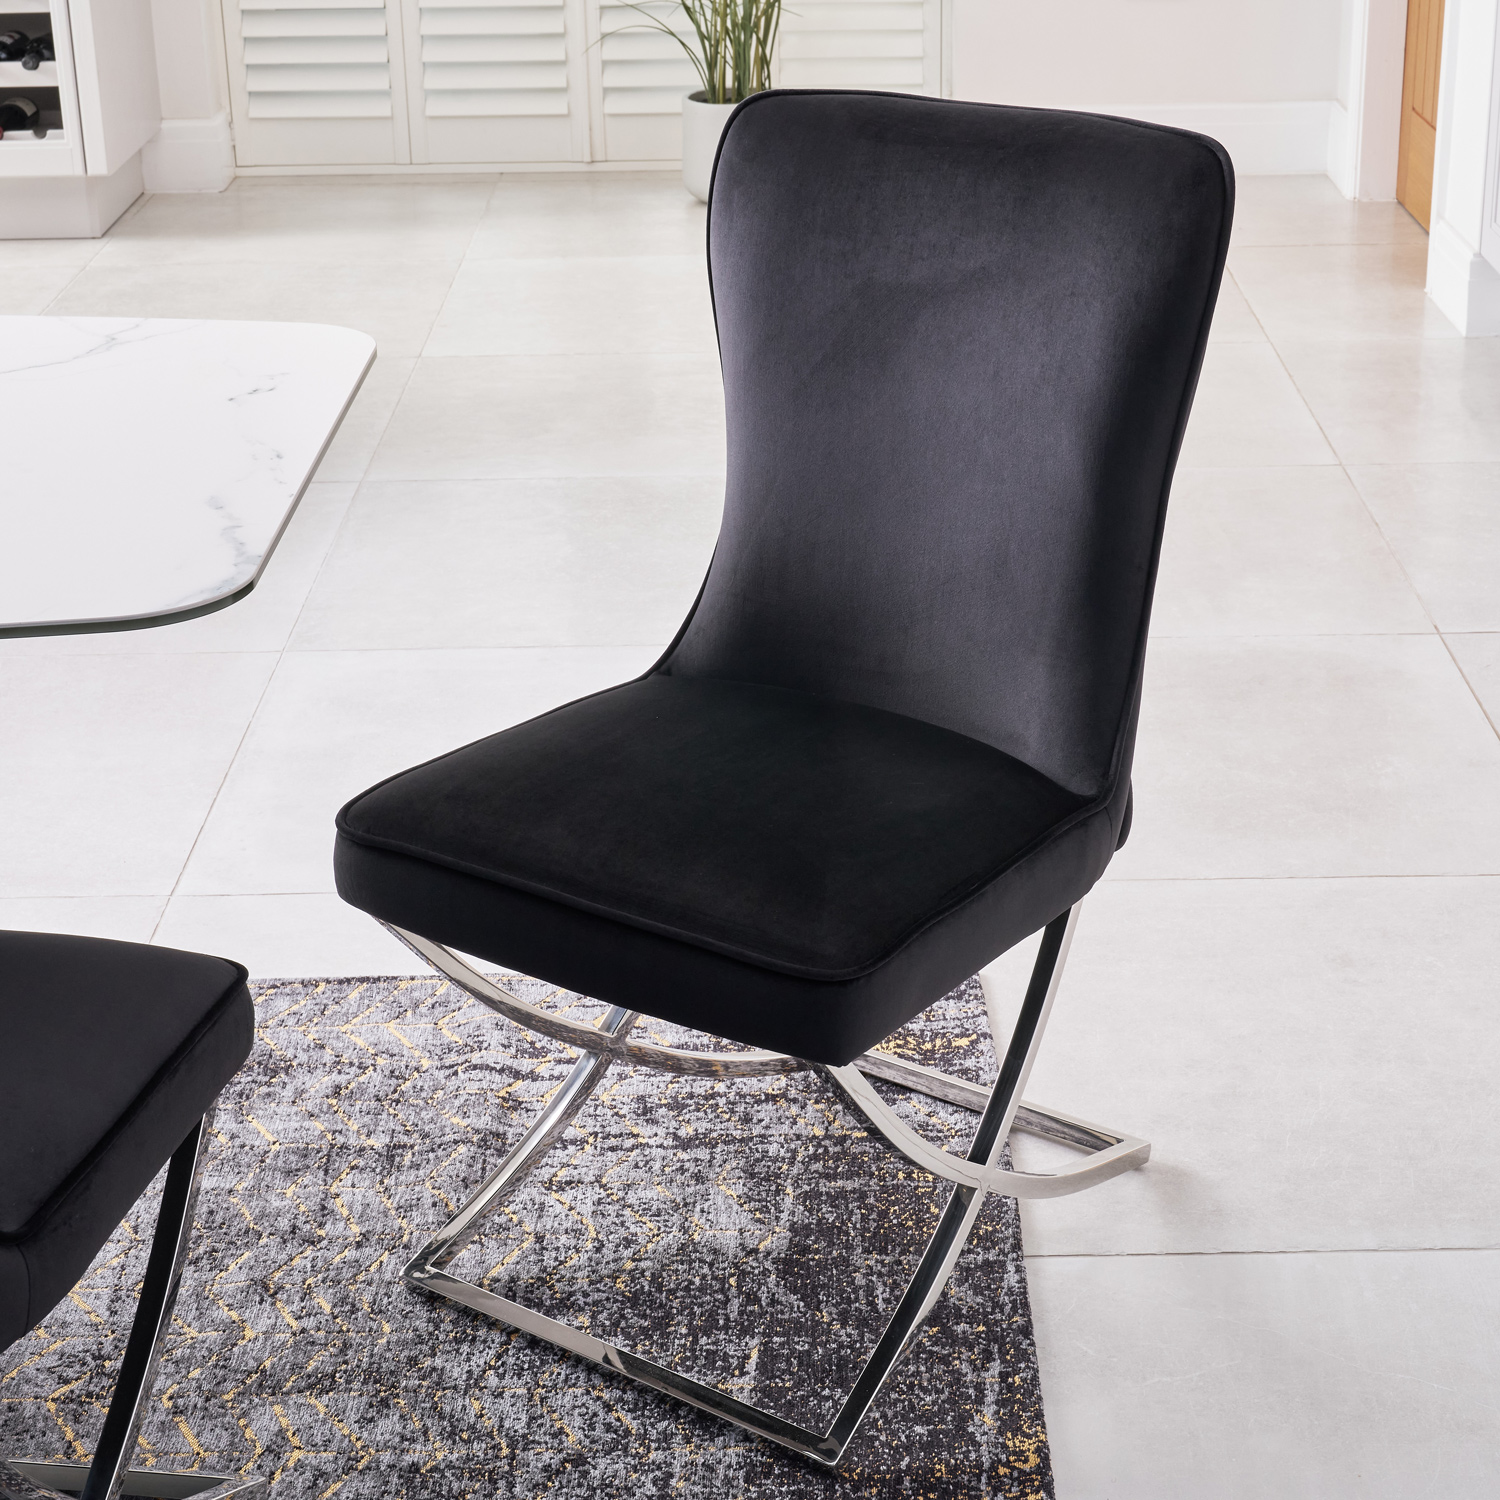 (Set of 2) Cheshire Black Brushed Velvet Dining Chair with a Stainless Steel Cross Leg